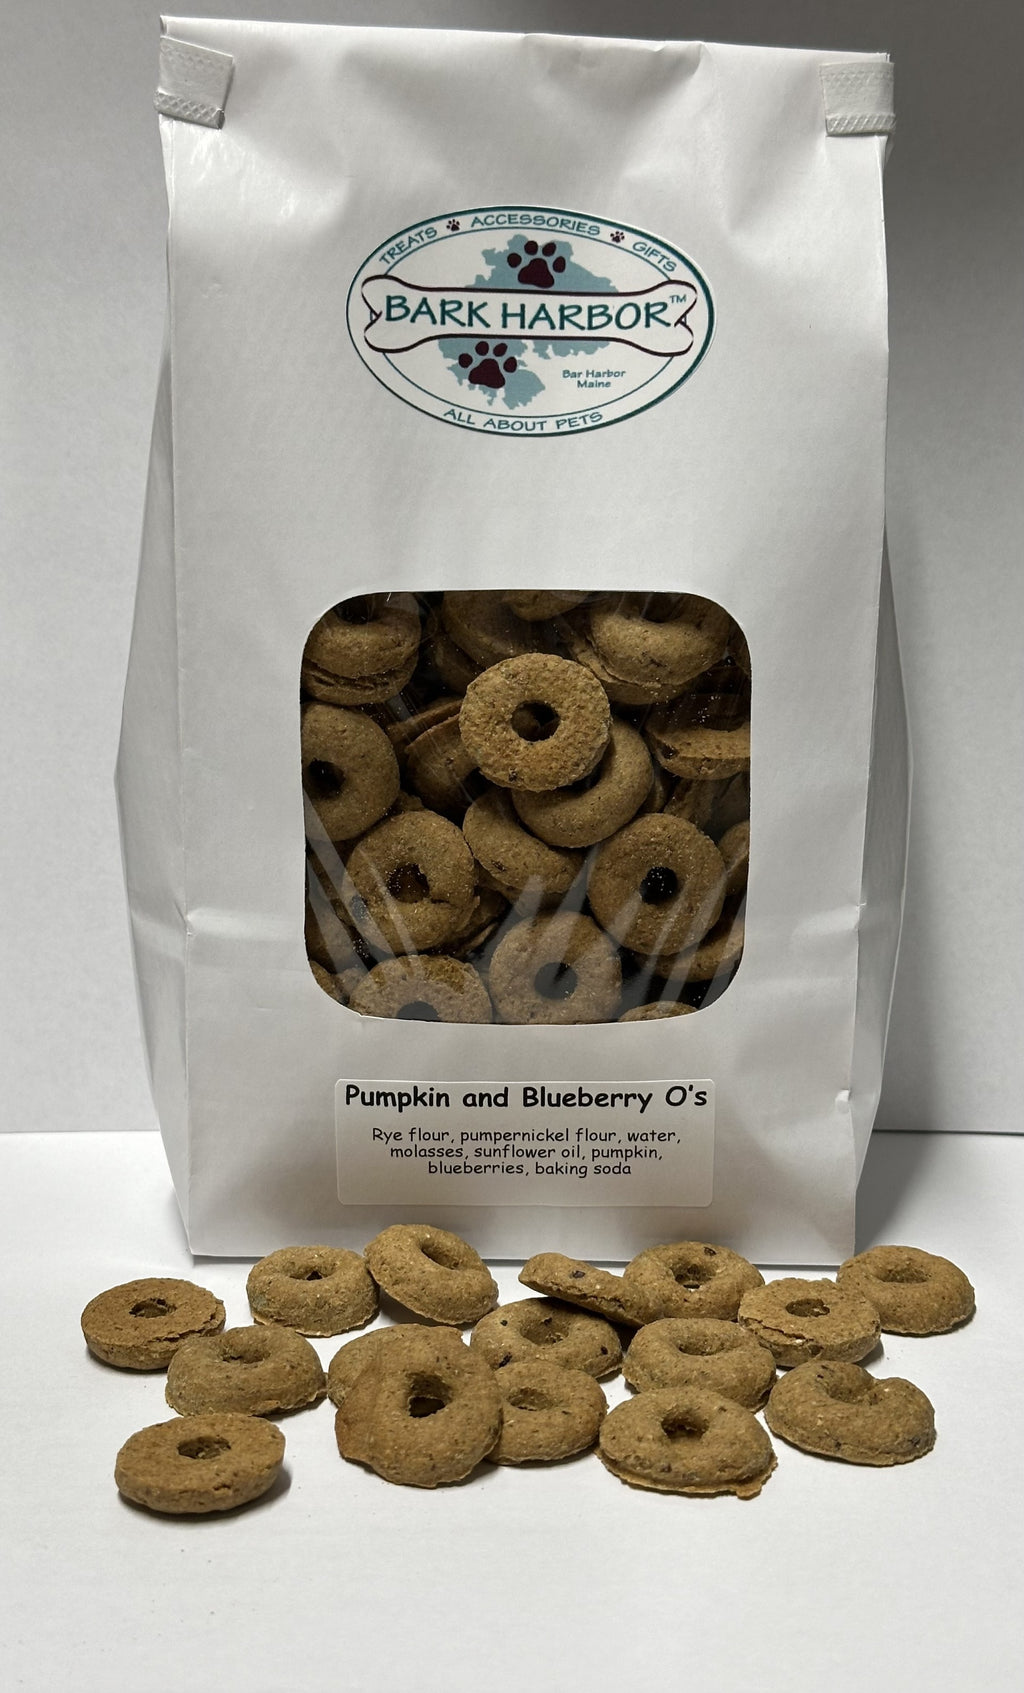 Pumpkin and Blueberry O's